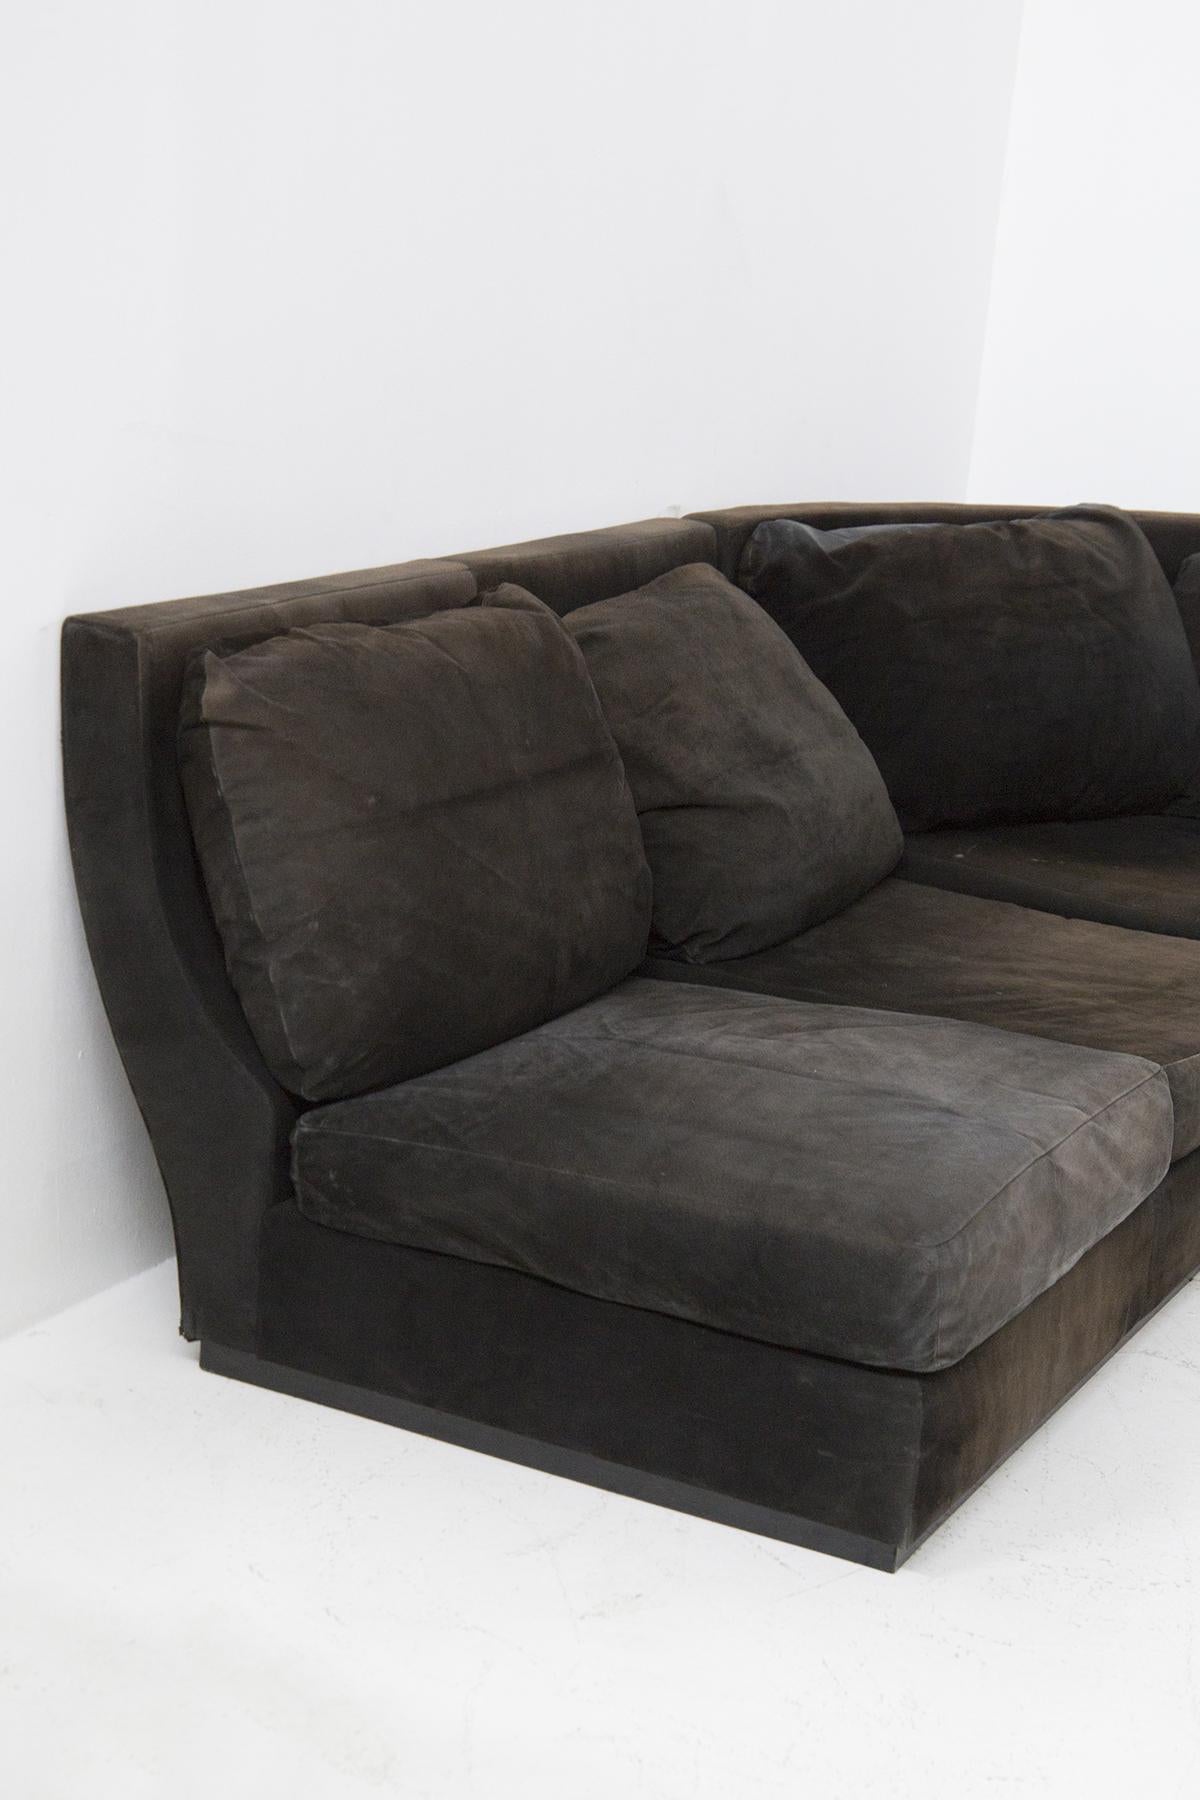 Beautiful corner sofa designed in the 1970s, of fine Italian manufacture.
The sofa is angular as you can see and is made entirely of black alcantara. There are 7 seat cushions and 7 back cushions. The base is quite stiff and covered with alcantara.